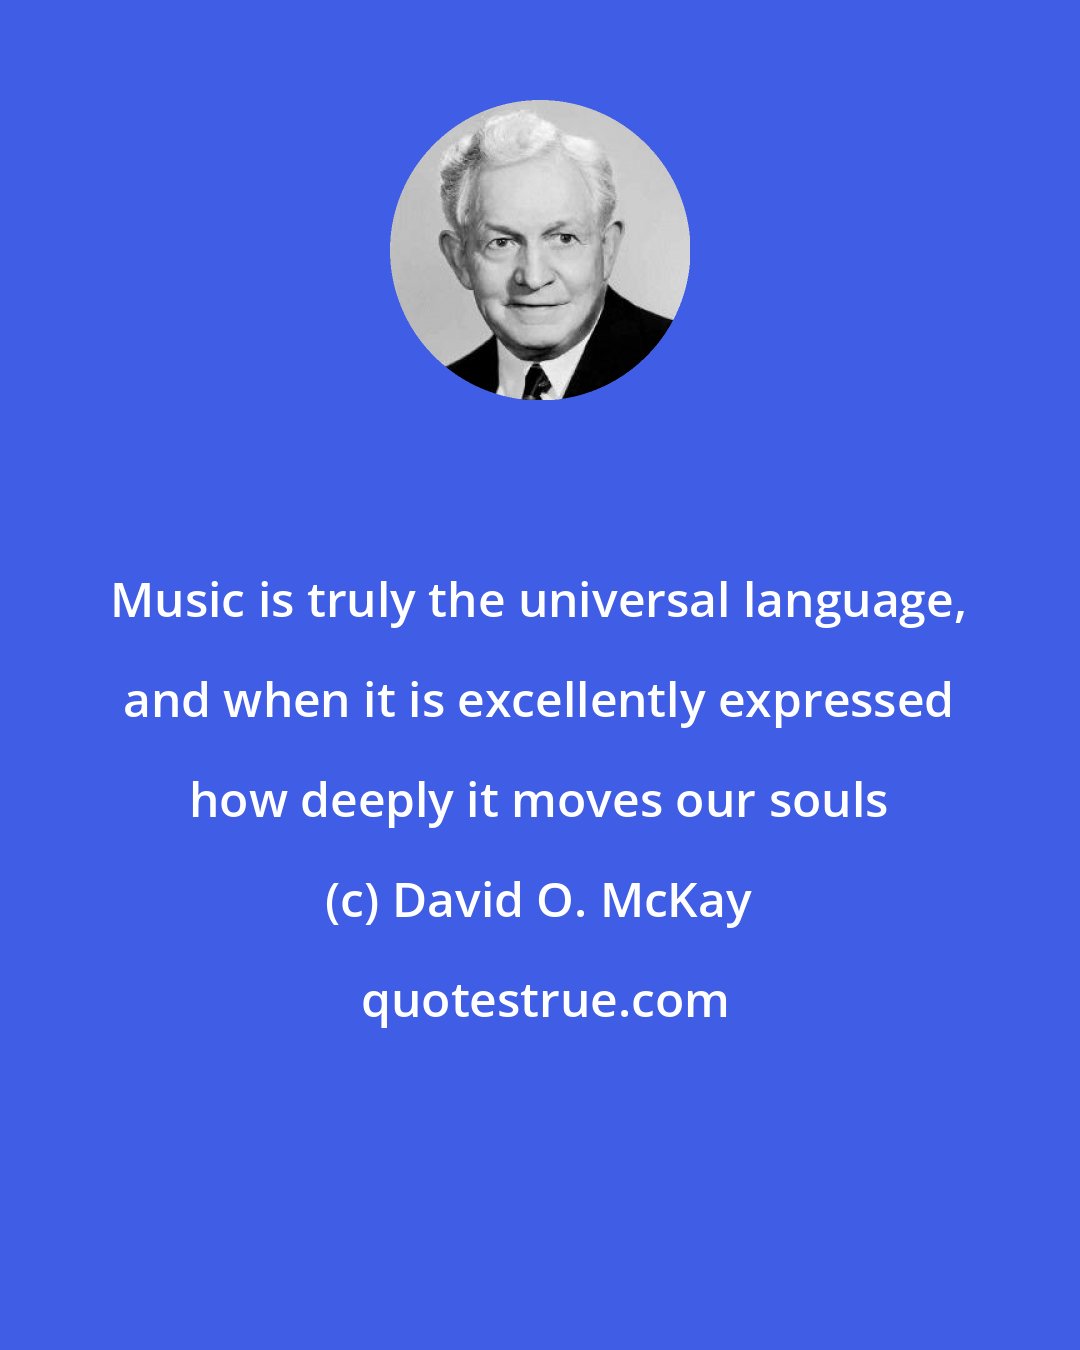 David O. McKay: Music is truly the universal language, and when it is excellently expressed how deeply it moves our souls